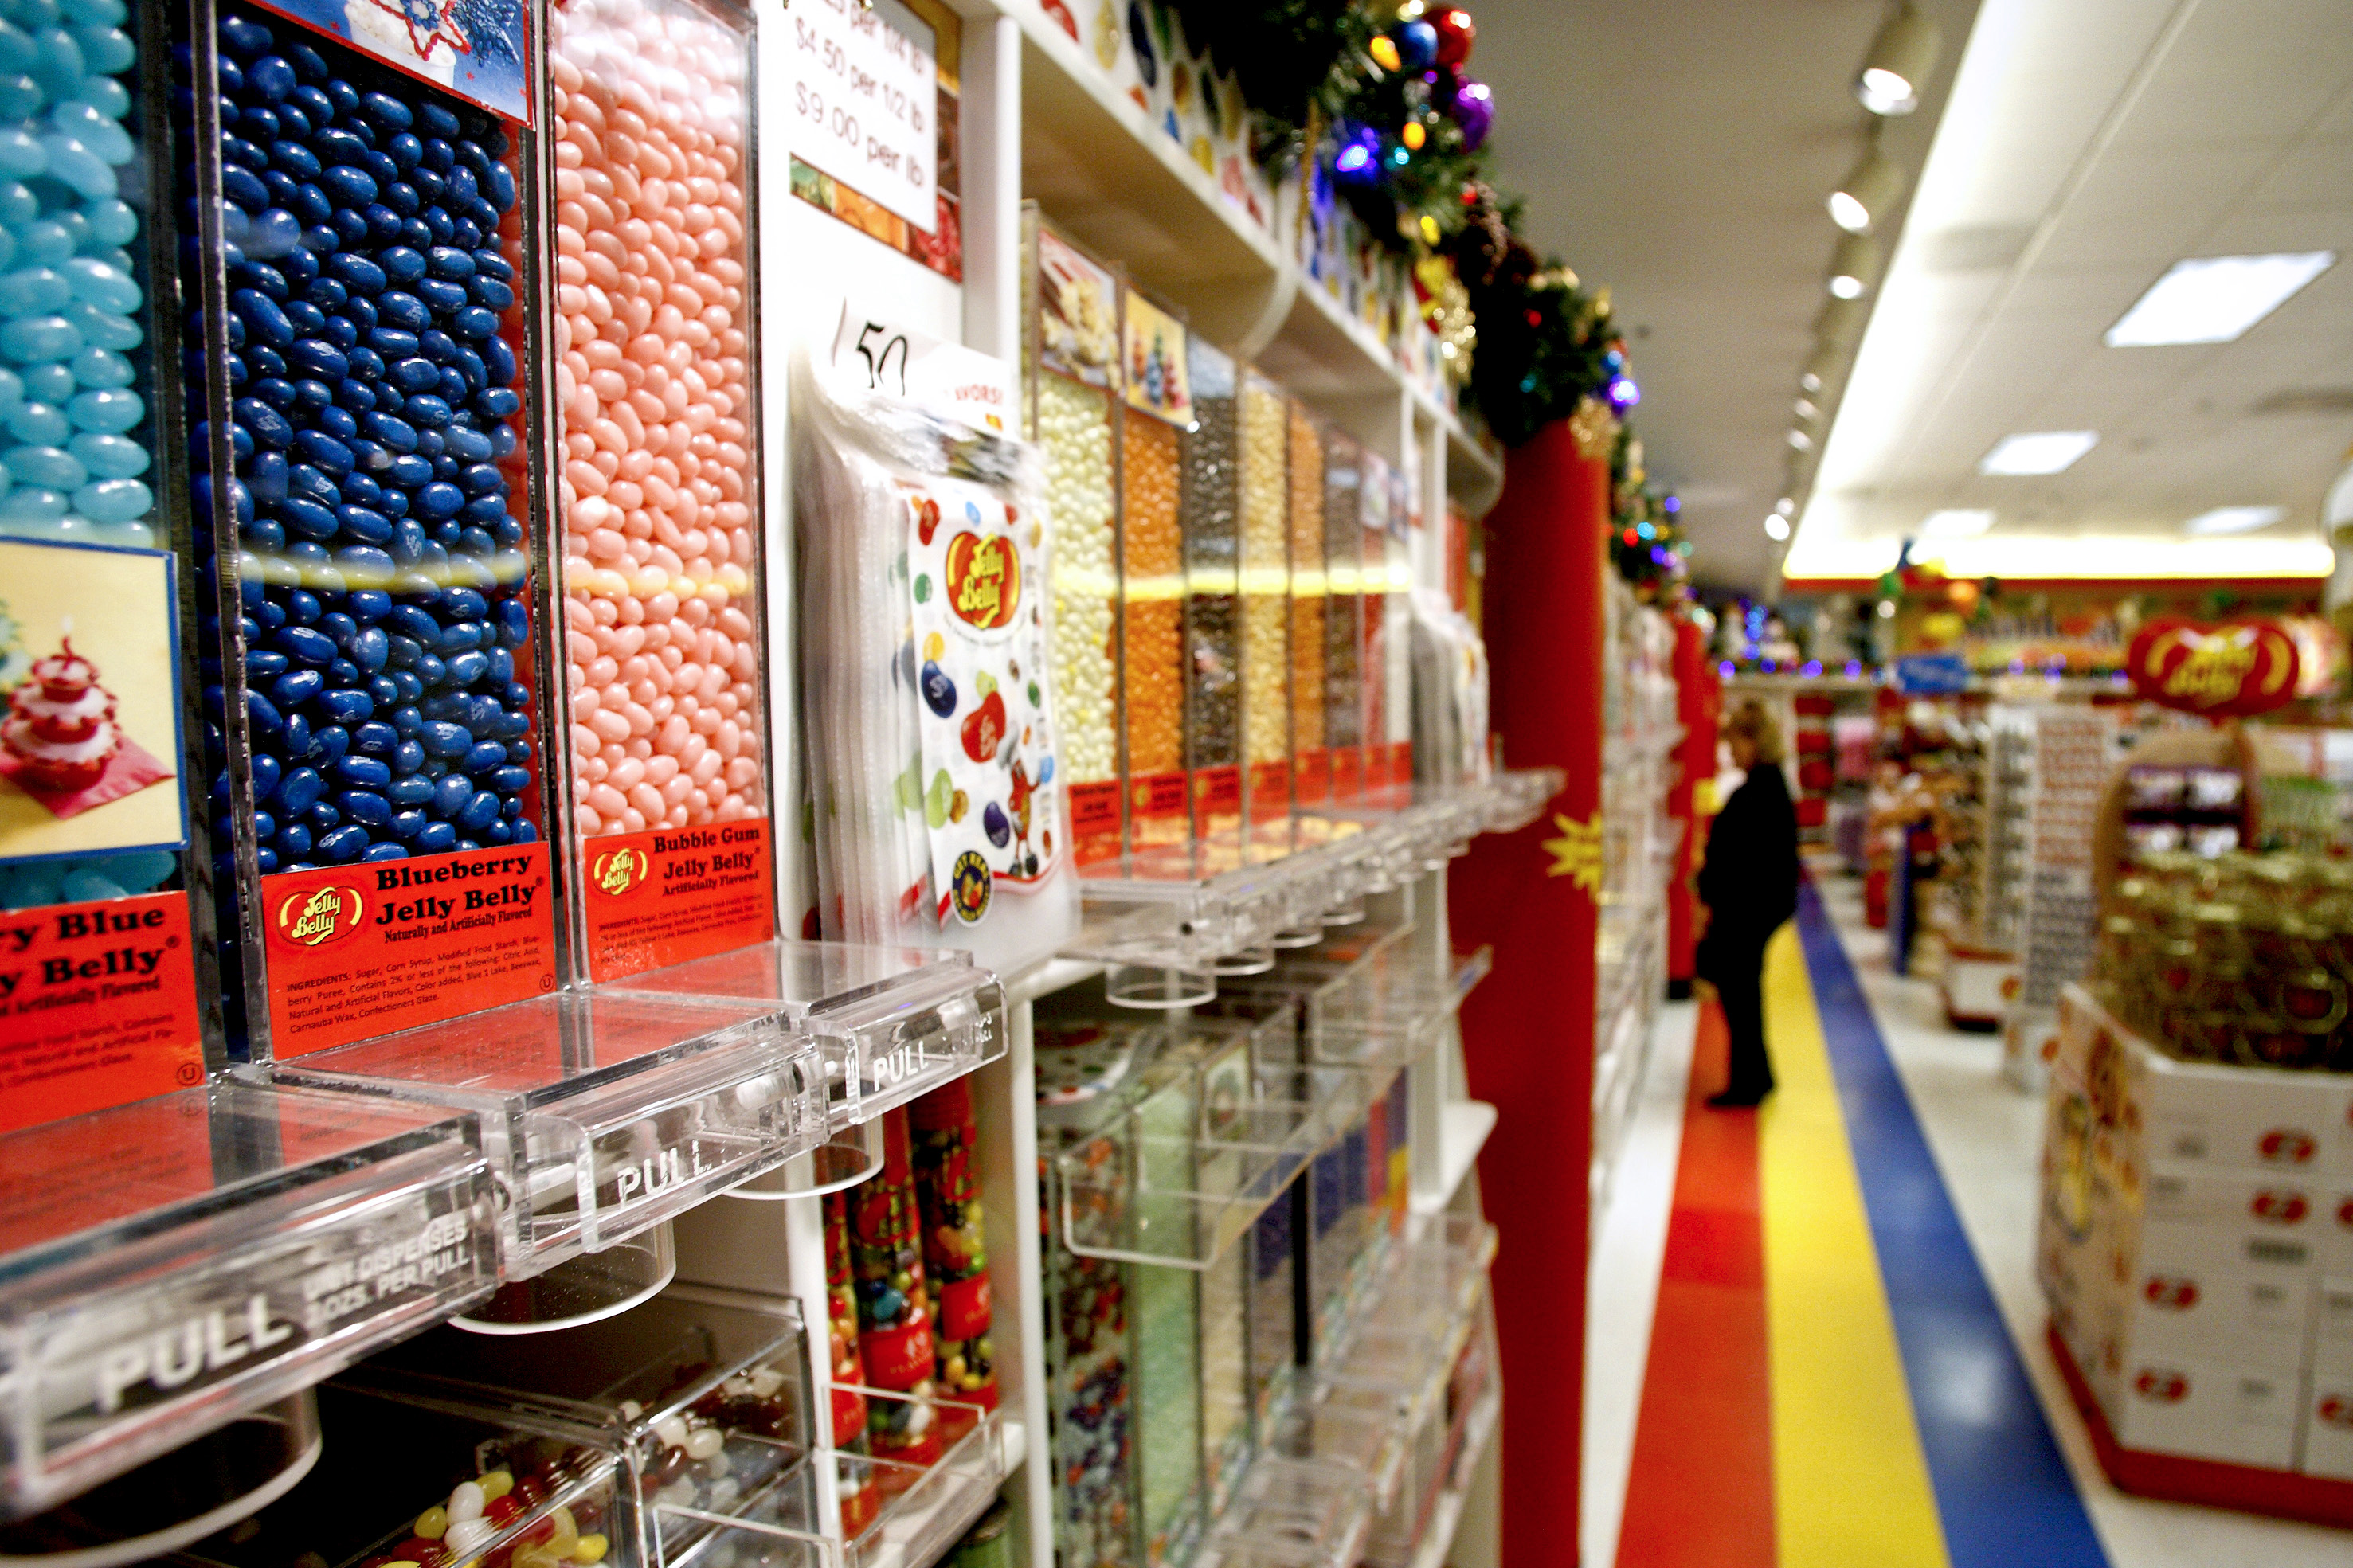 Jelly beans sit for sale at the Jelly Belly Candy Co. store next to the company's manufacturing facility in Fairfield, Calif., U.S., on Tuesday, Dec. 14, 2010. (Ken James&mdash;Bloomberg /Getty Images)